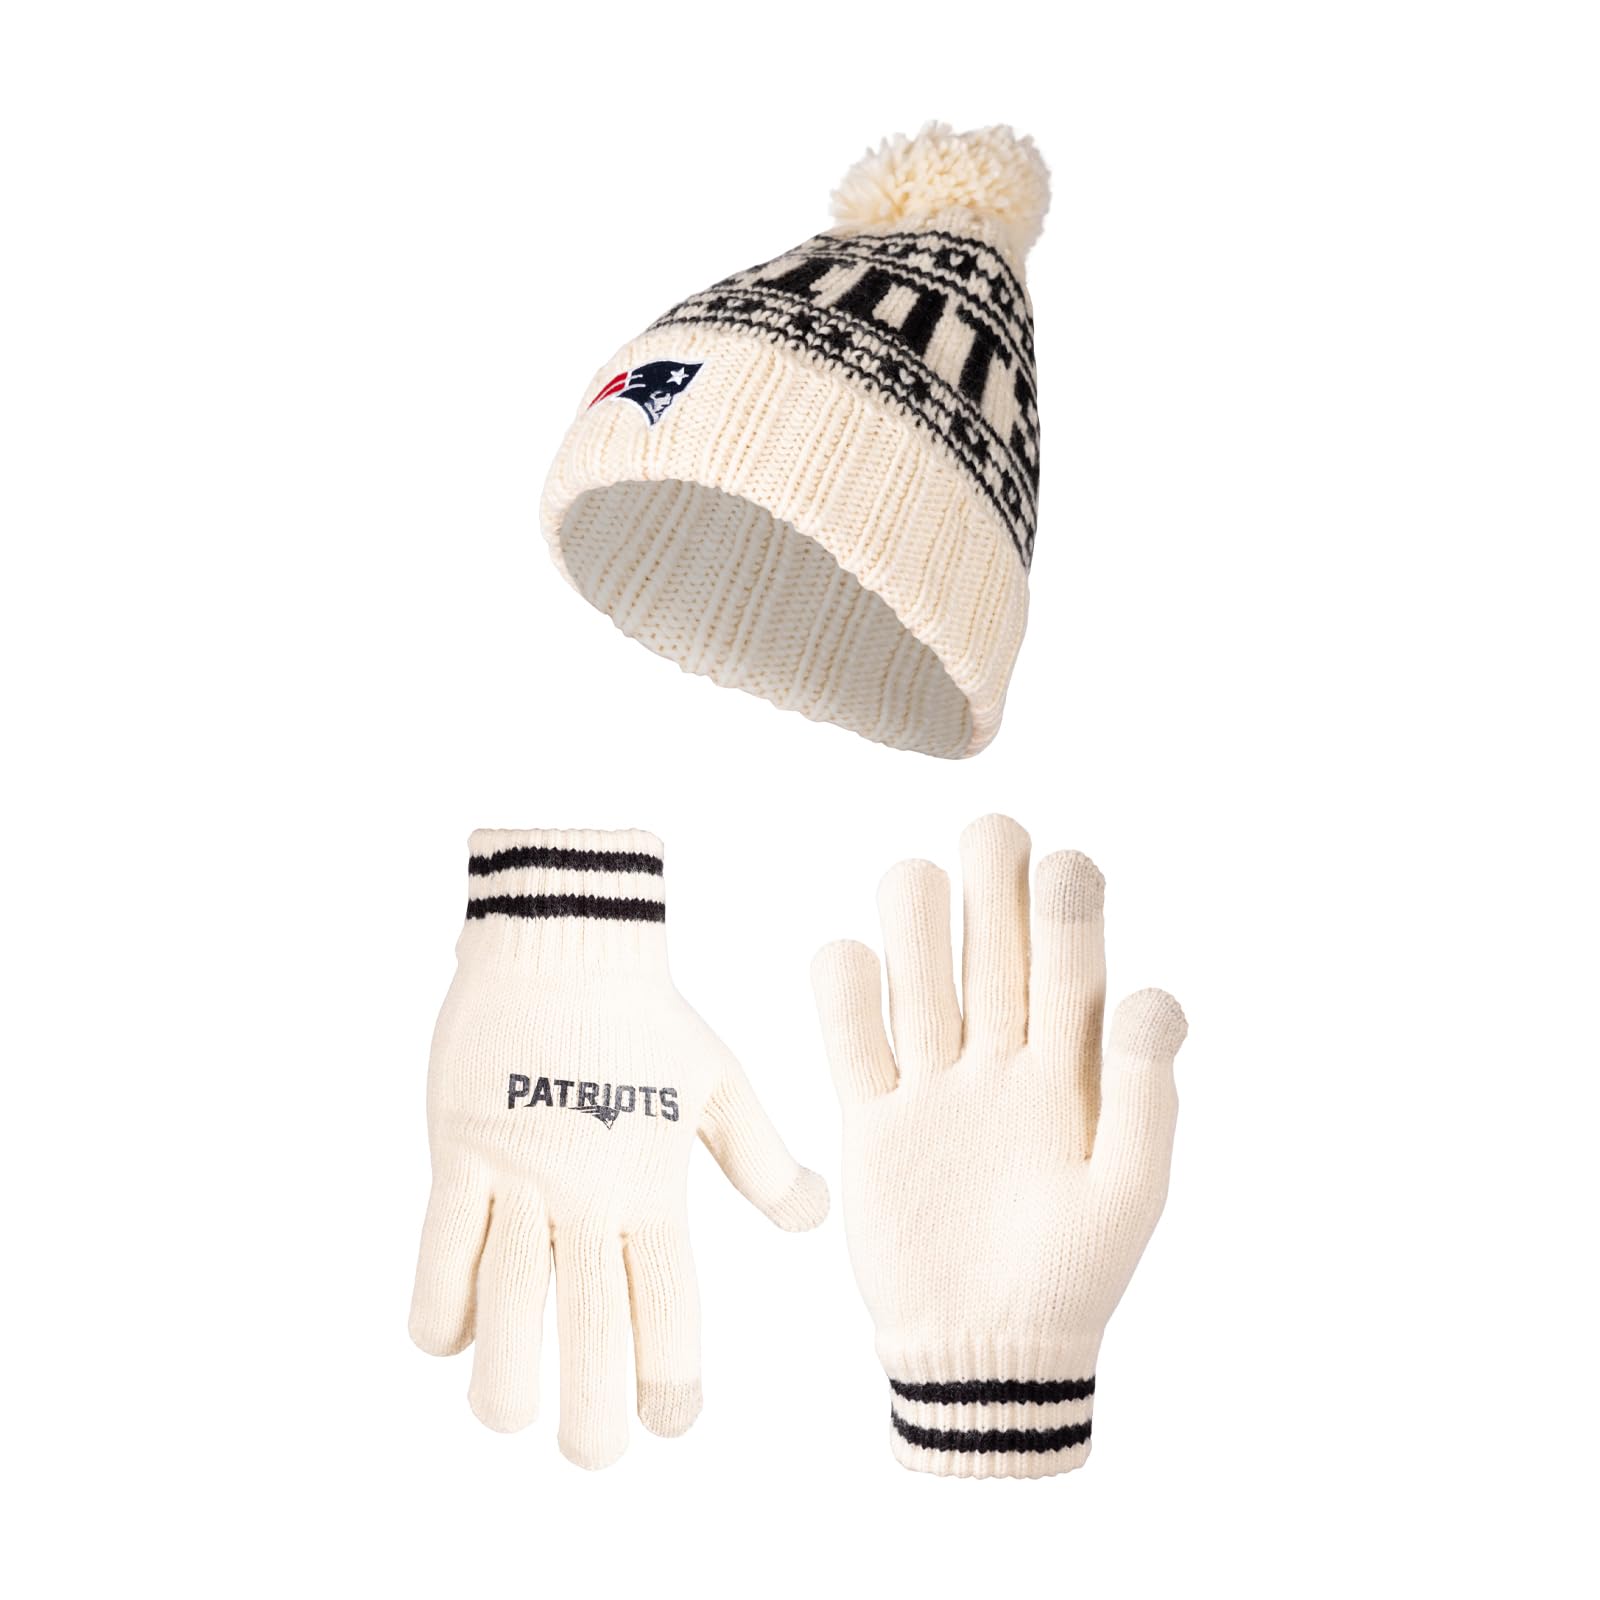 Ultra Game NFL New England Patriots Womens Super Soft Cable Knit Winter Beanie Knit Hat with Extra Warm Touch Screen Gloves|New England Patriots - UltraGameShop